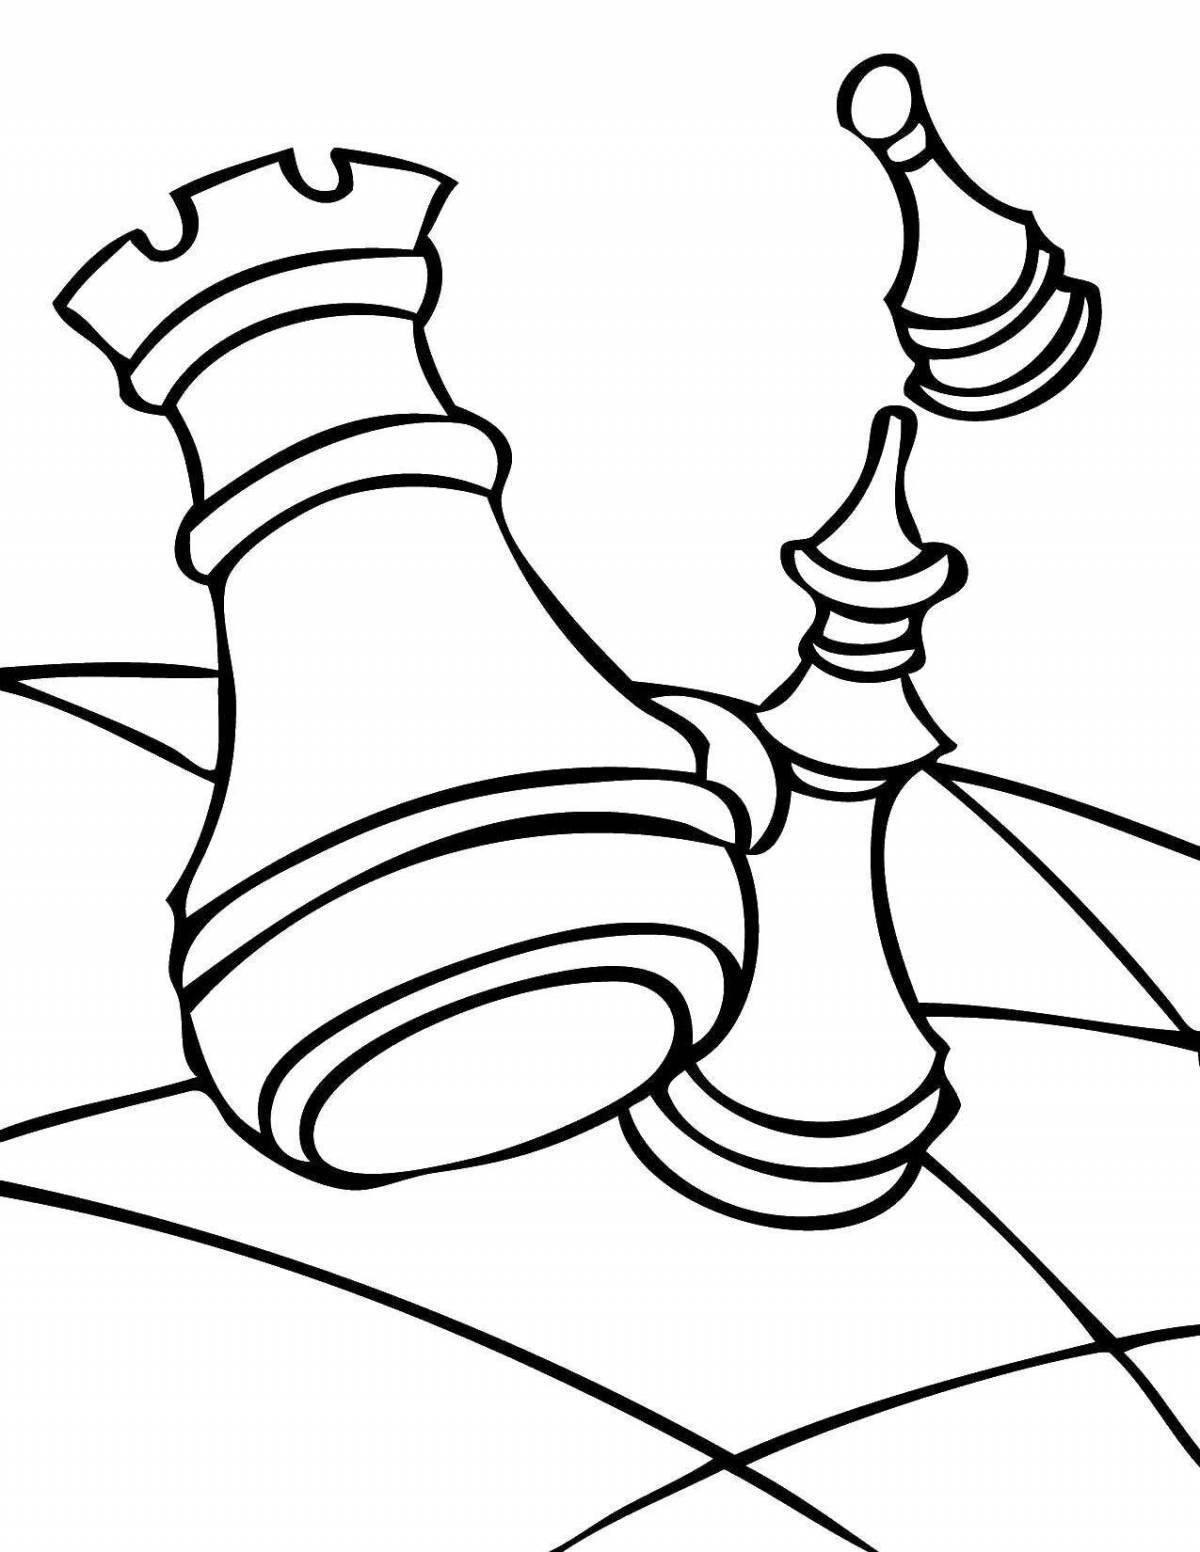 Coloring book shining chess pieces